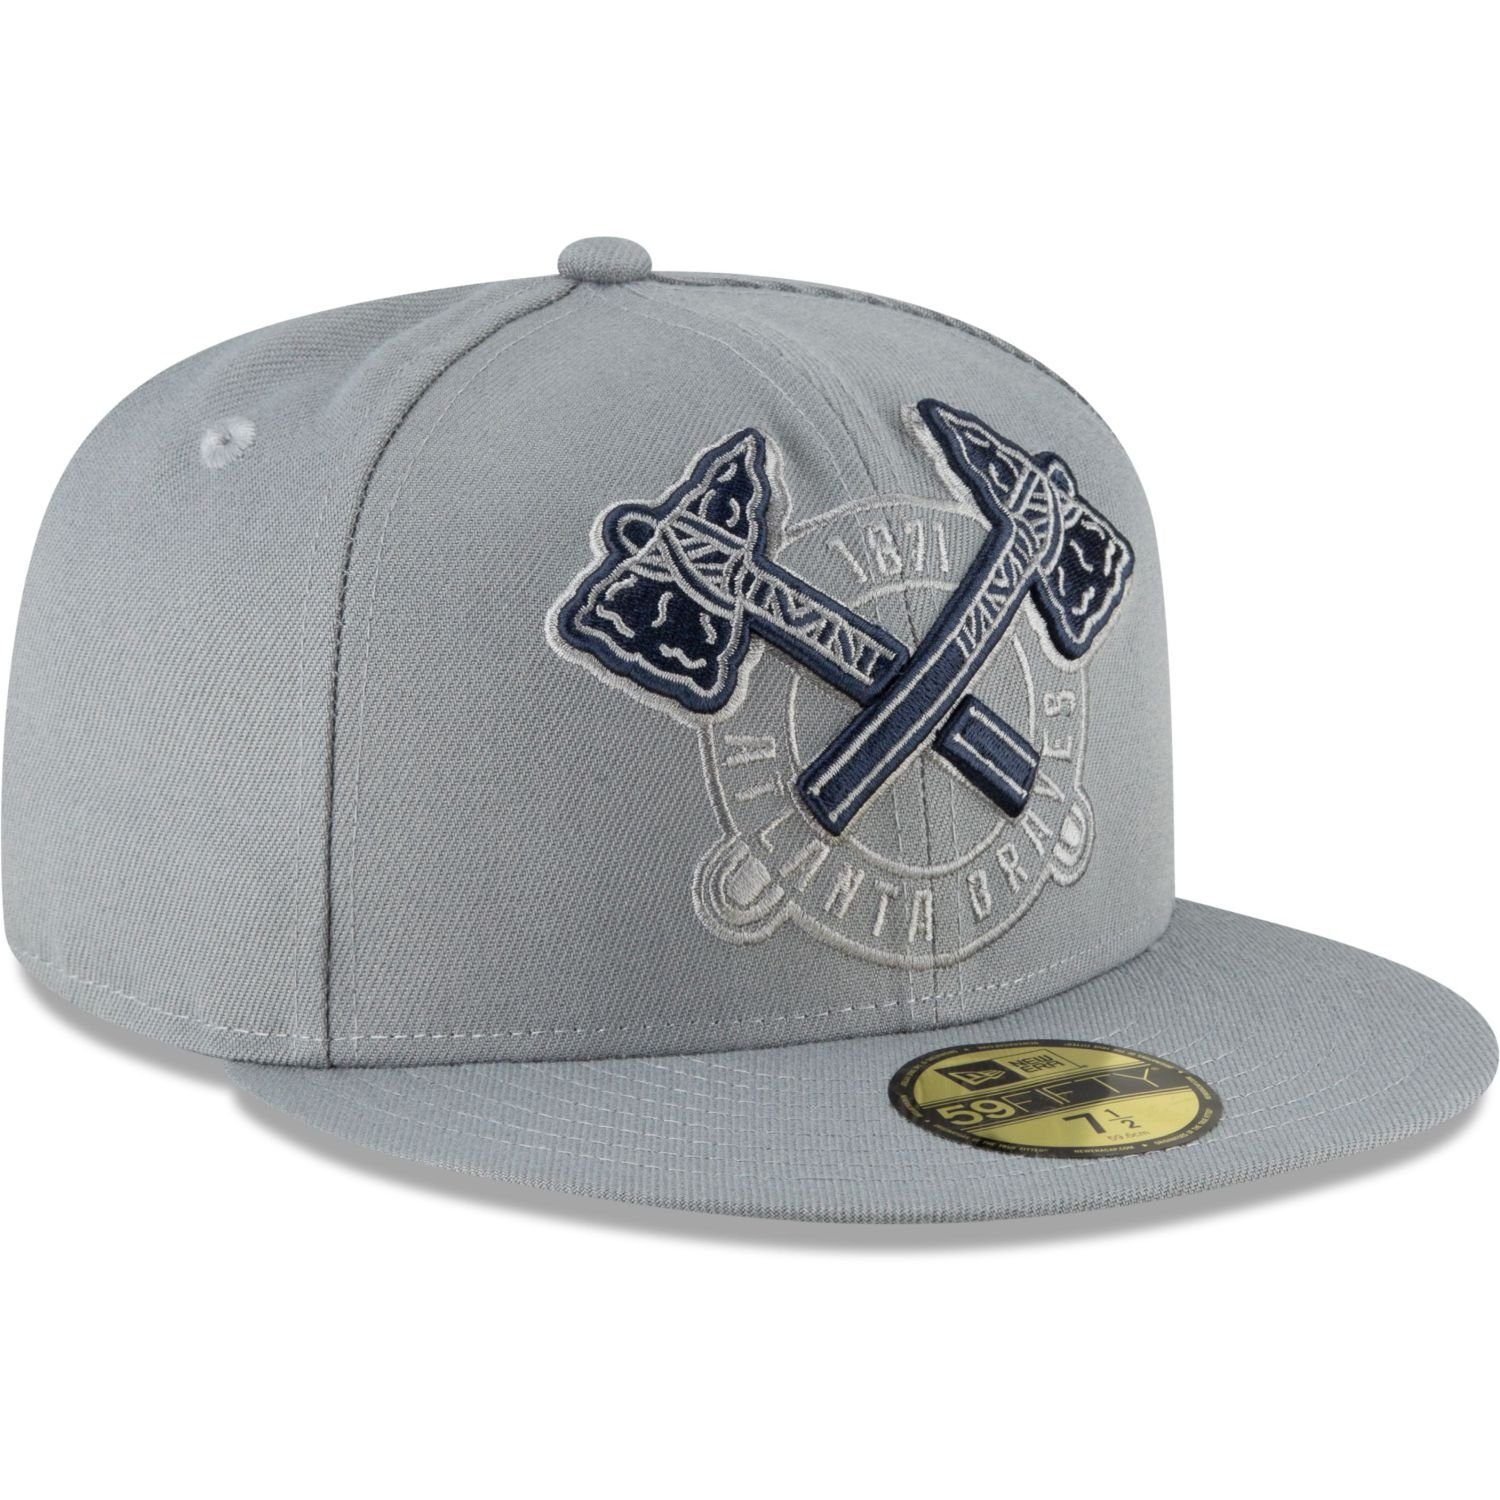 New Era Fitted Cap 59Fifty MLB Team GREY Braves STORM Atlanta Cooperstown